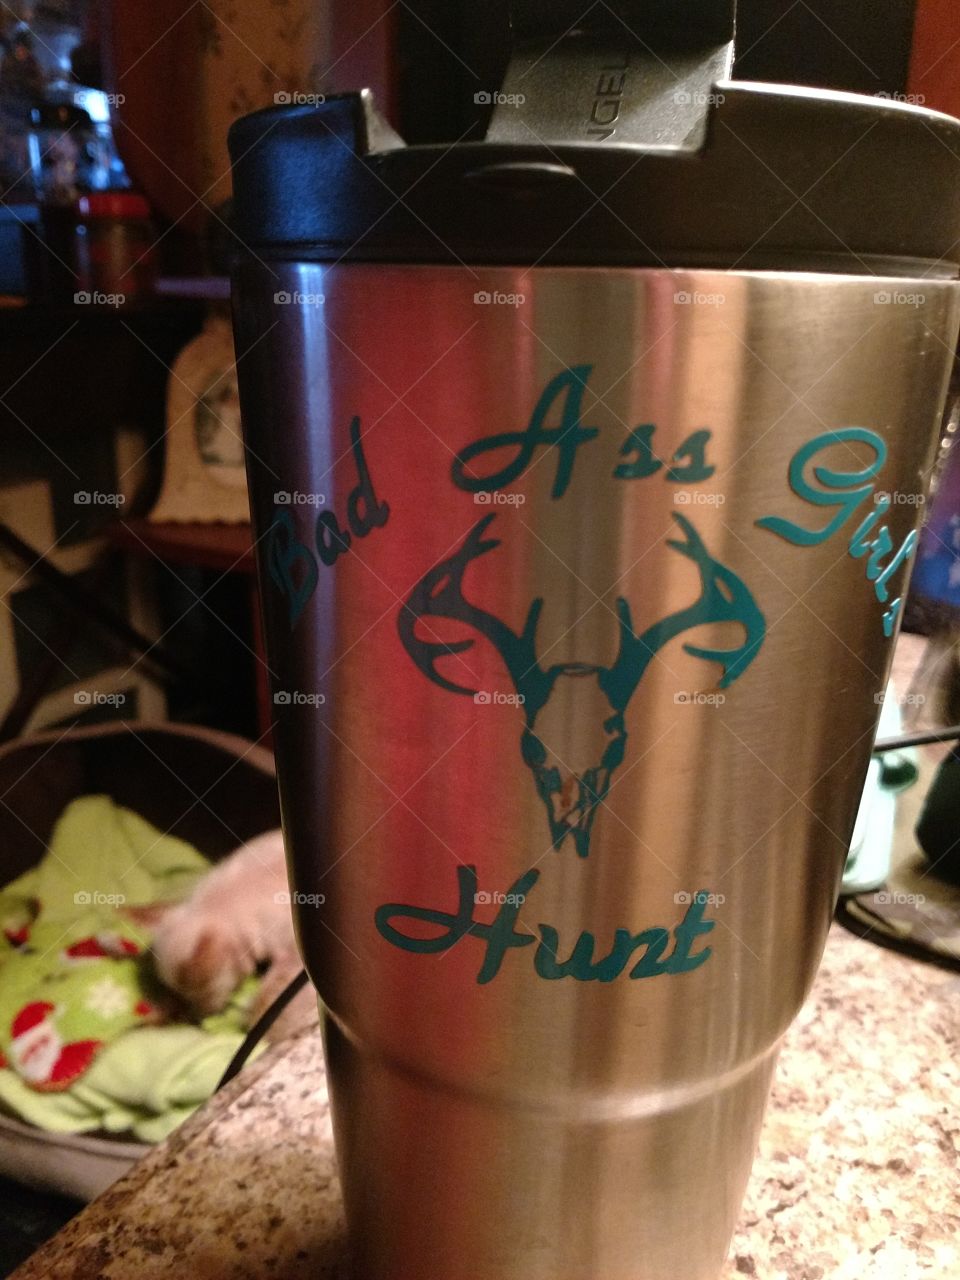 sweet tea,
it's a southern thing, "Bad Ass Girls Hunt"